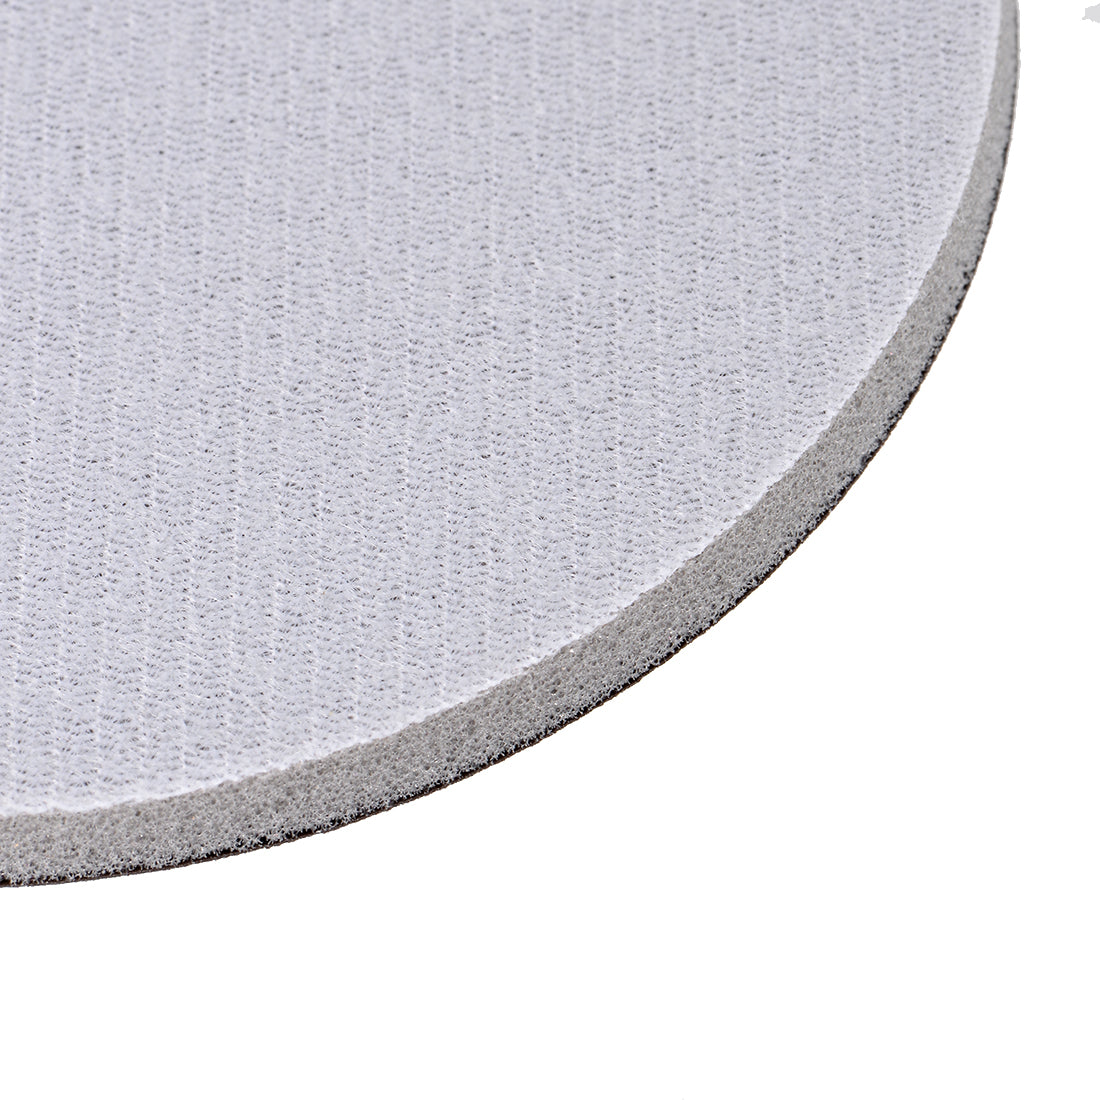 uxcell Uxcell 4-Inch 800-Grits Hook and Loop Sanding Disc, Sponge Sanding Pad Wet Dry Aluminum Oxide Sandpaper for Polishing & Grinding 10pcs